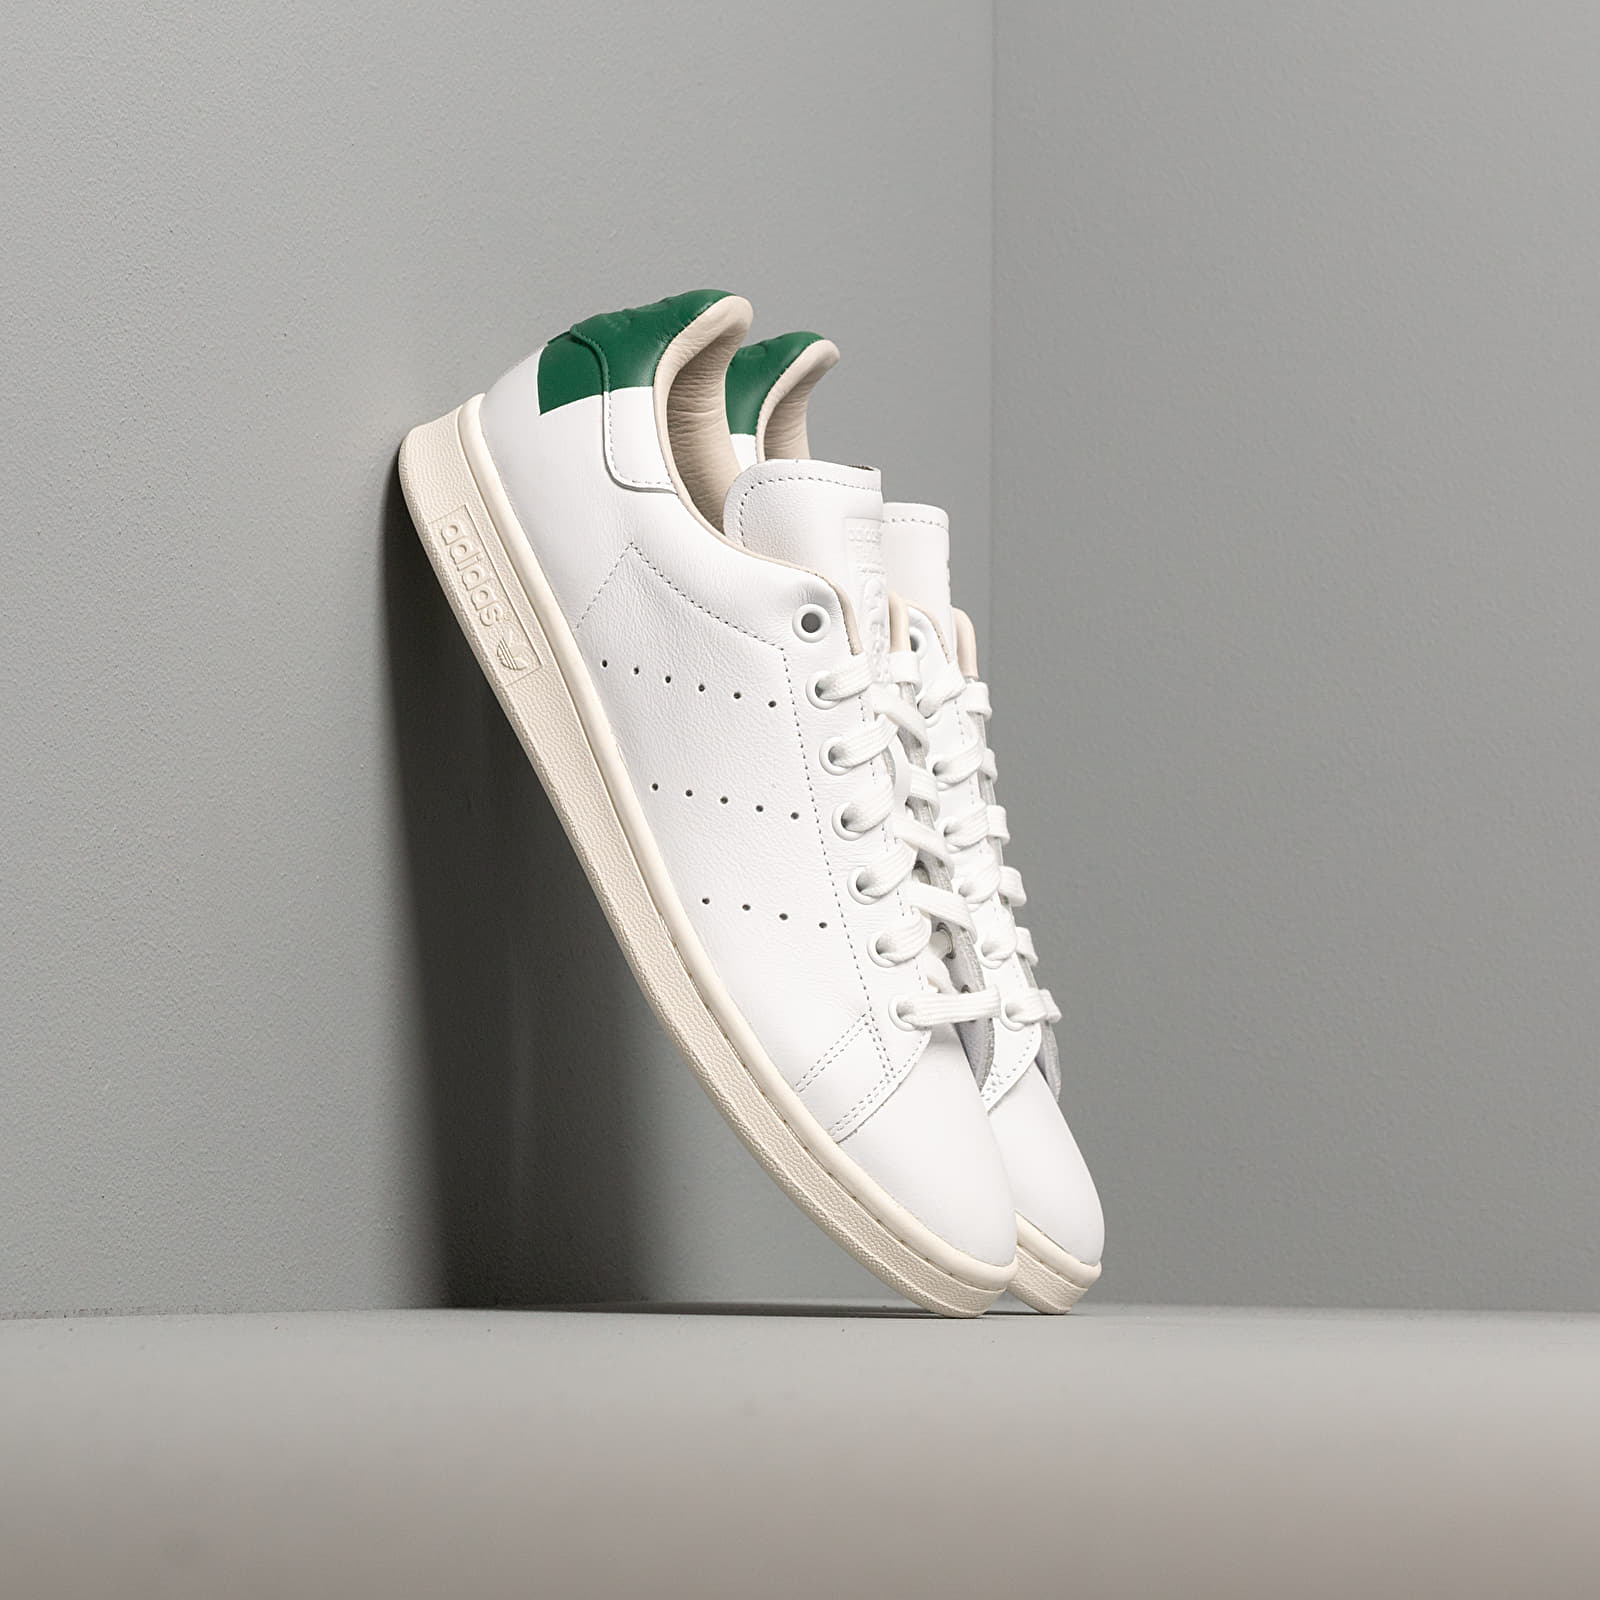 Chaussures et baskets homme adidas Stan Smith Ftw White/ Core Green/ Off White